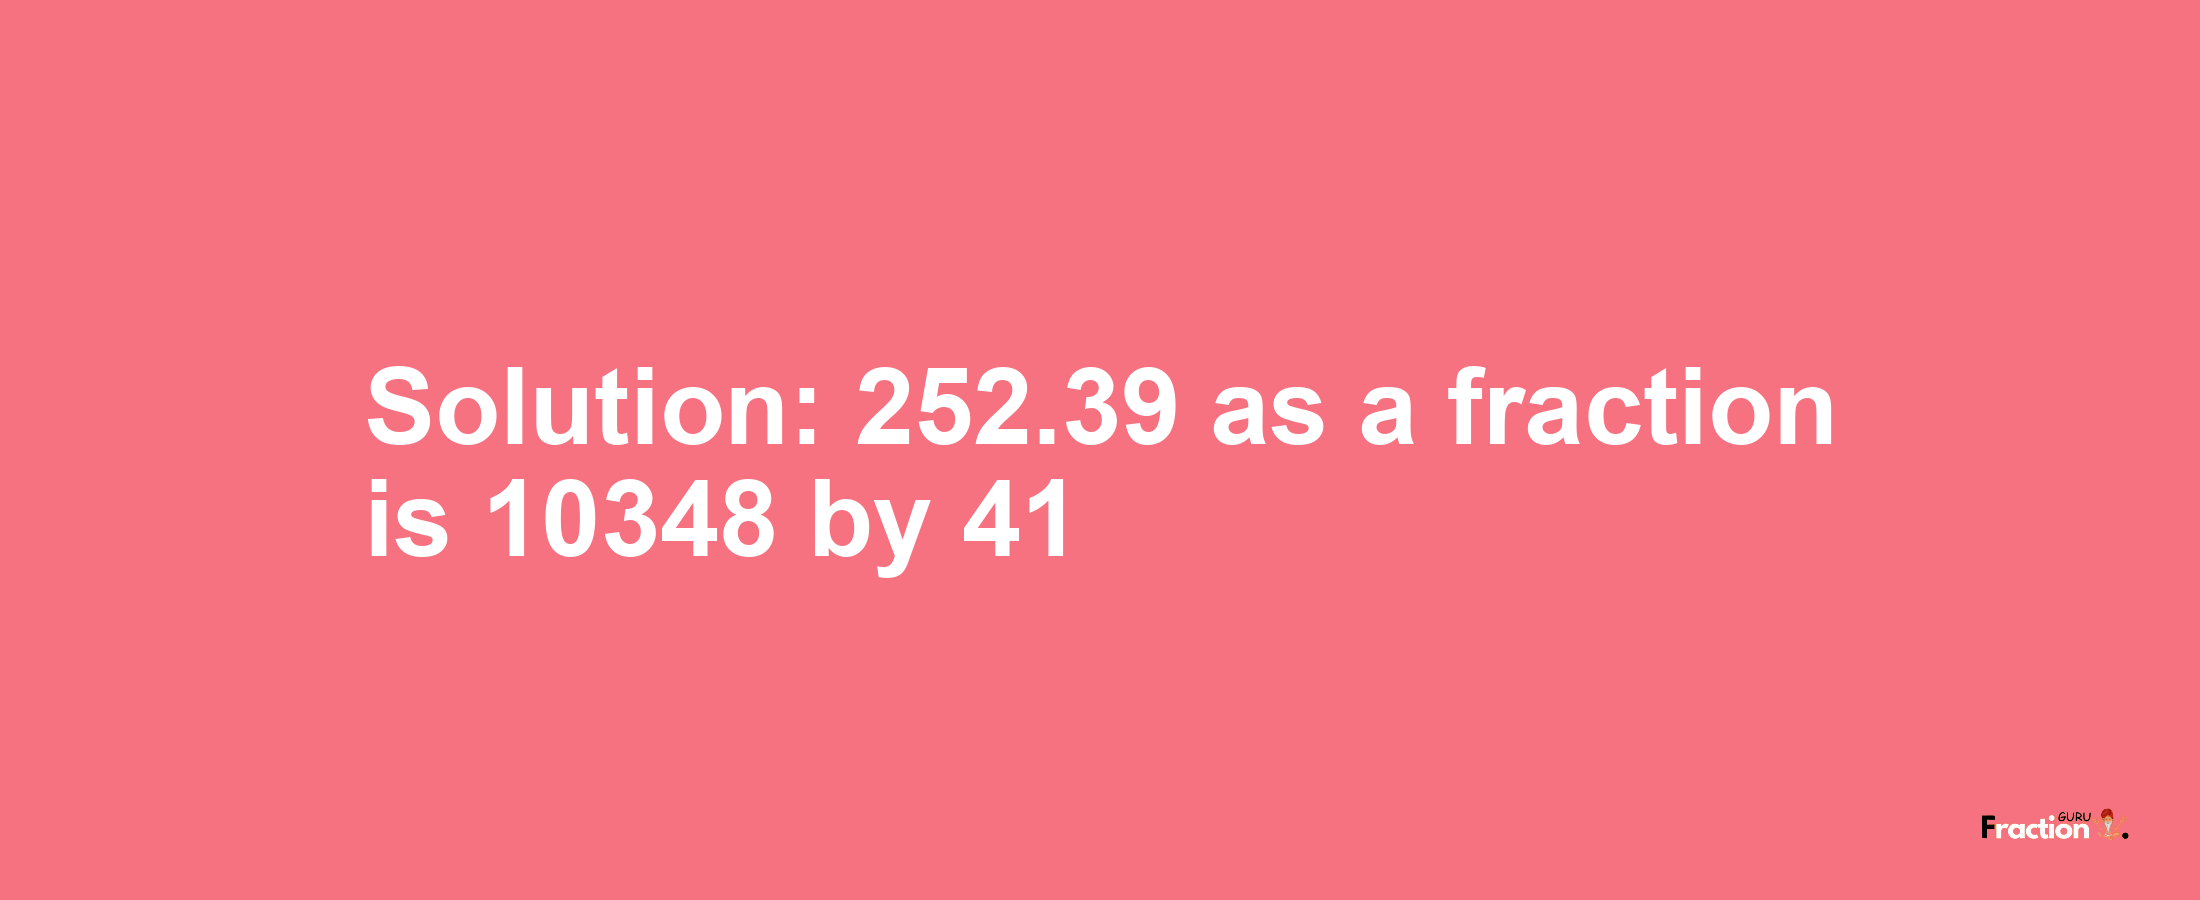 Solution:252.39 as a fraction is 10348/41